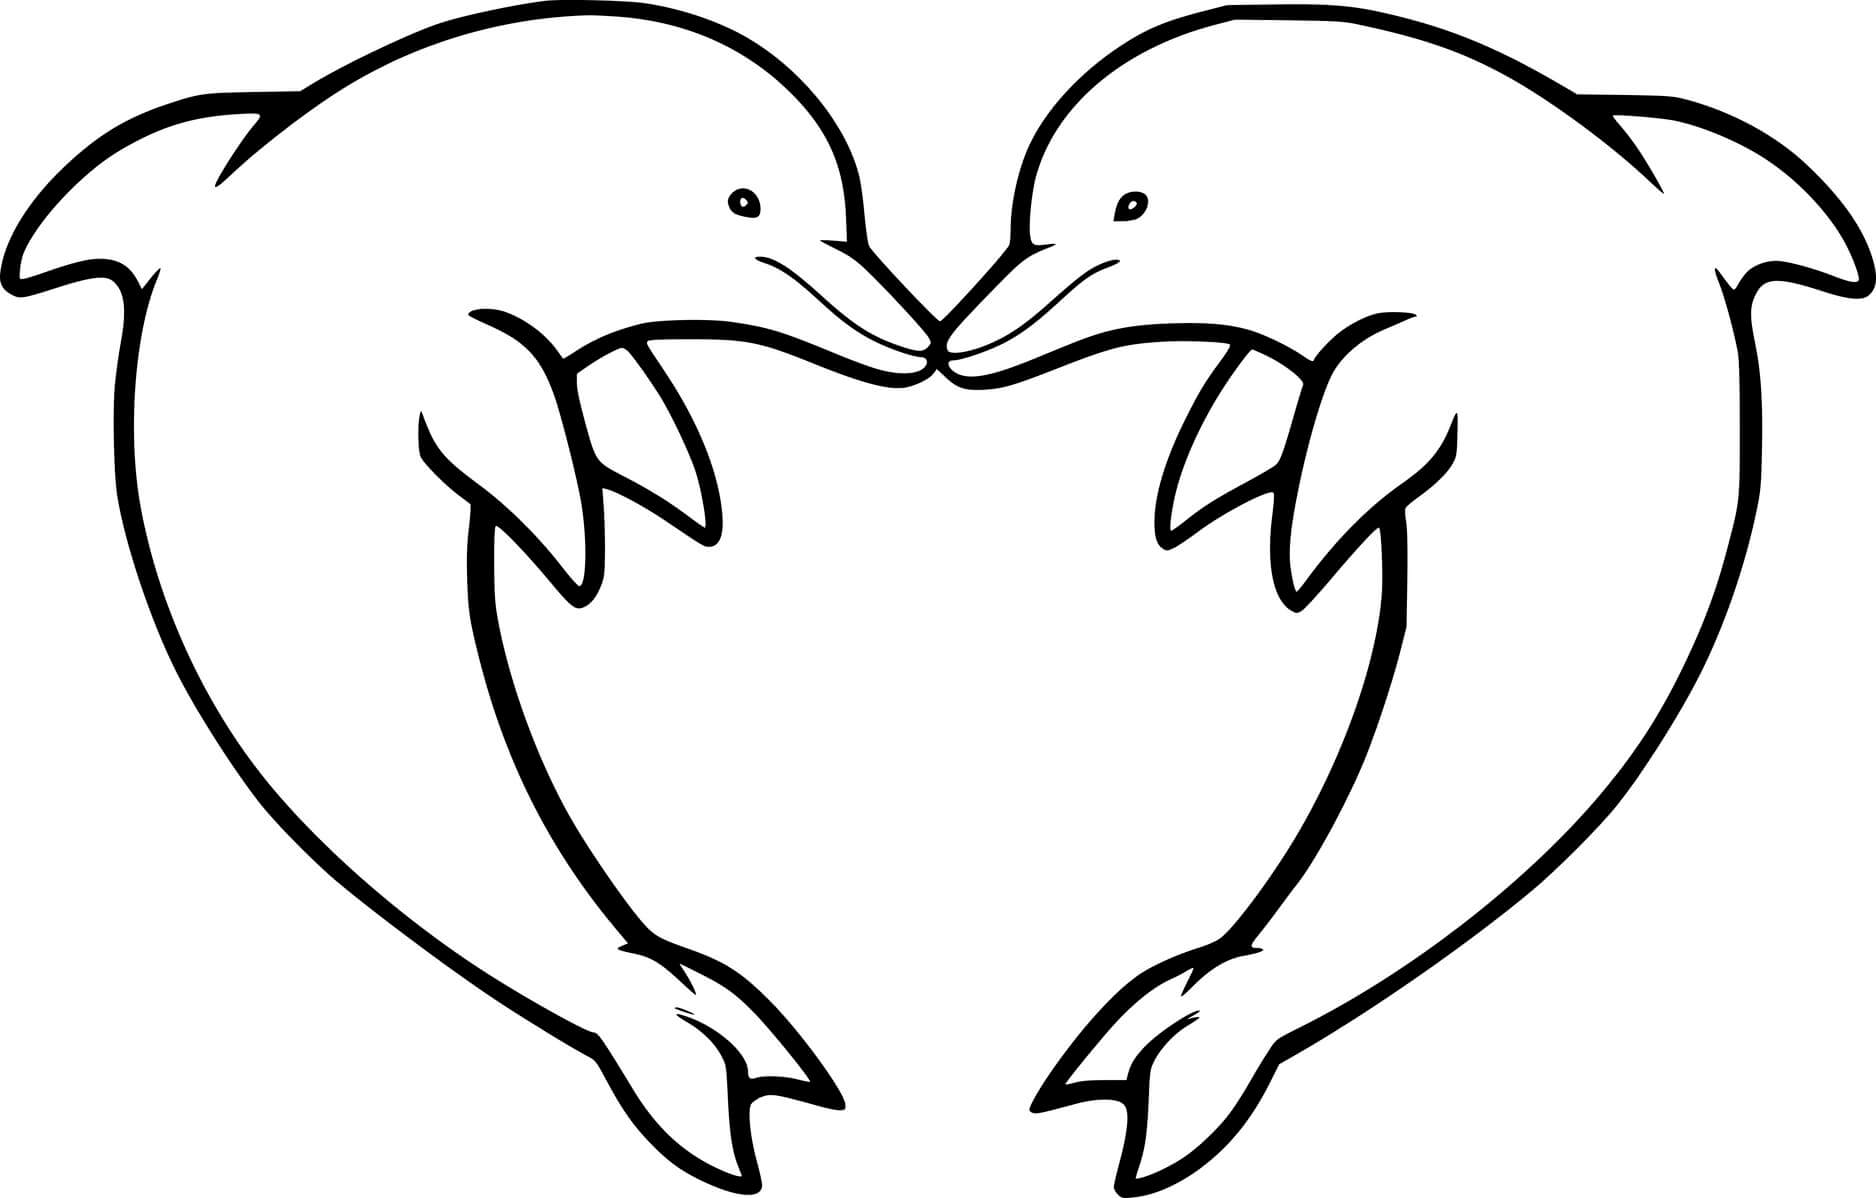 Two Dolphins Shaped A Heart